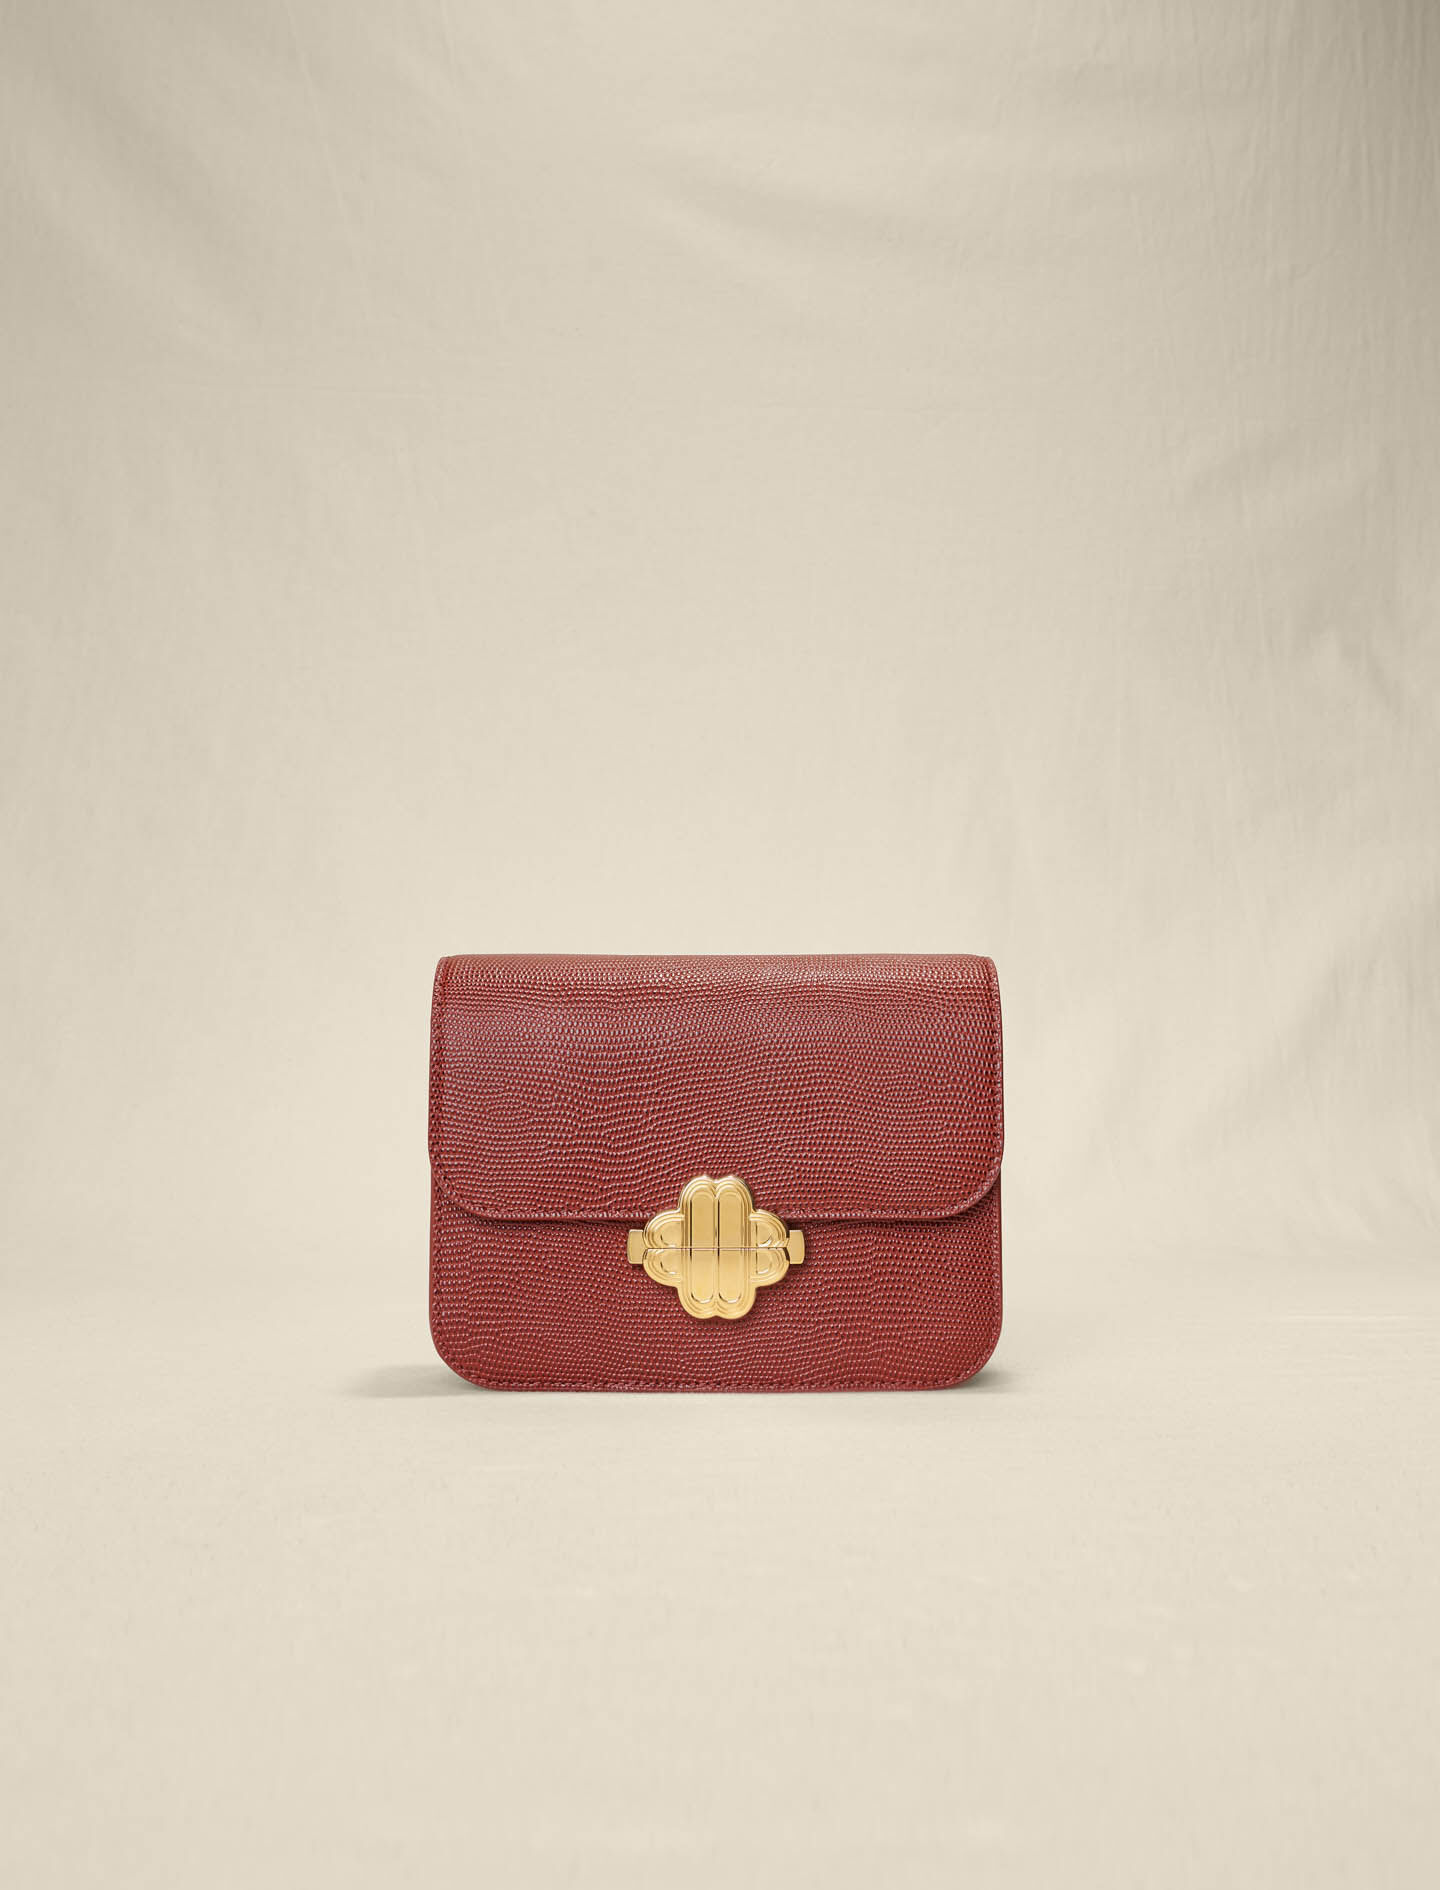 Small Leather Pouch - Giddy Up Clutch Purse | Buffalo Billfold Co.